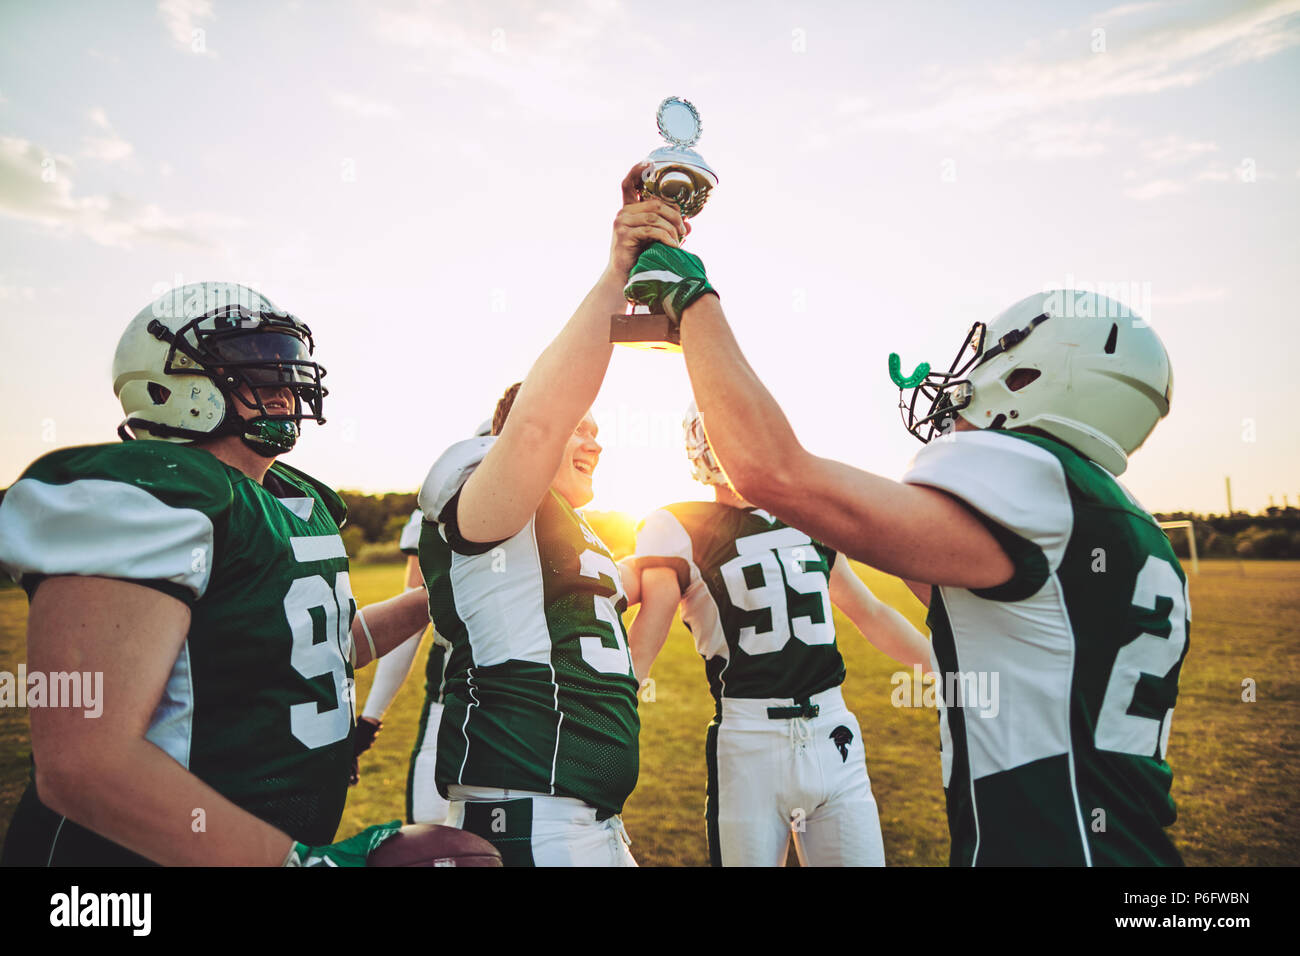 Excited group of young American football players raising a championship trophy together in celebration after a game Stock Photo